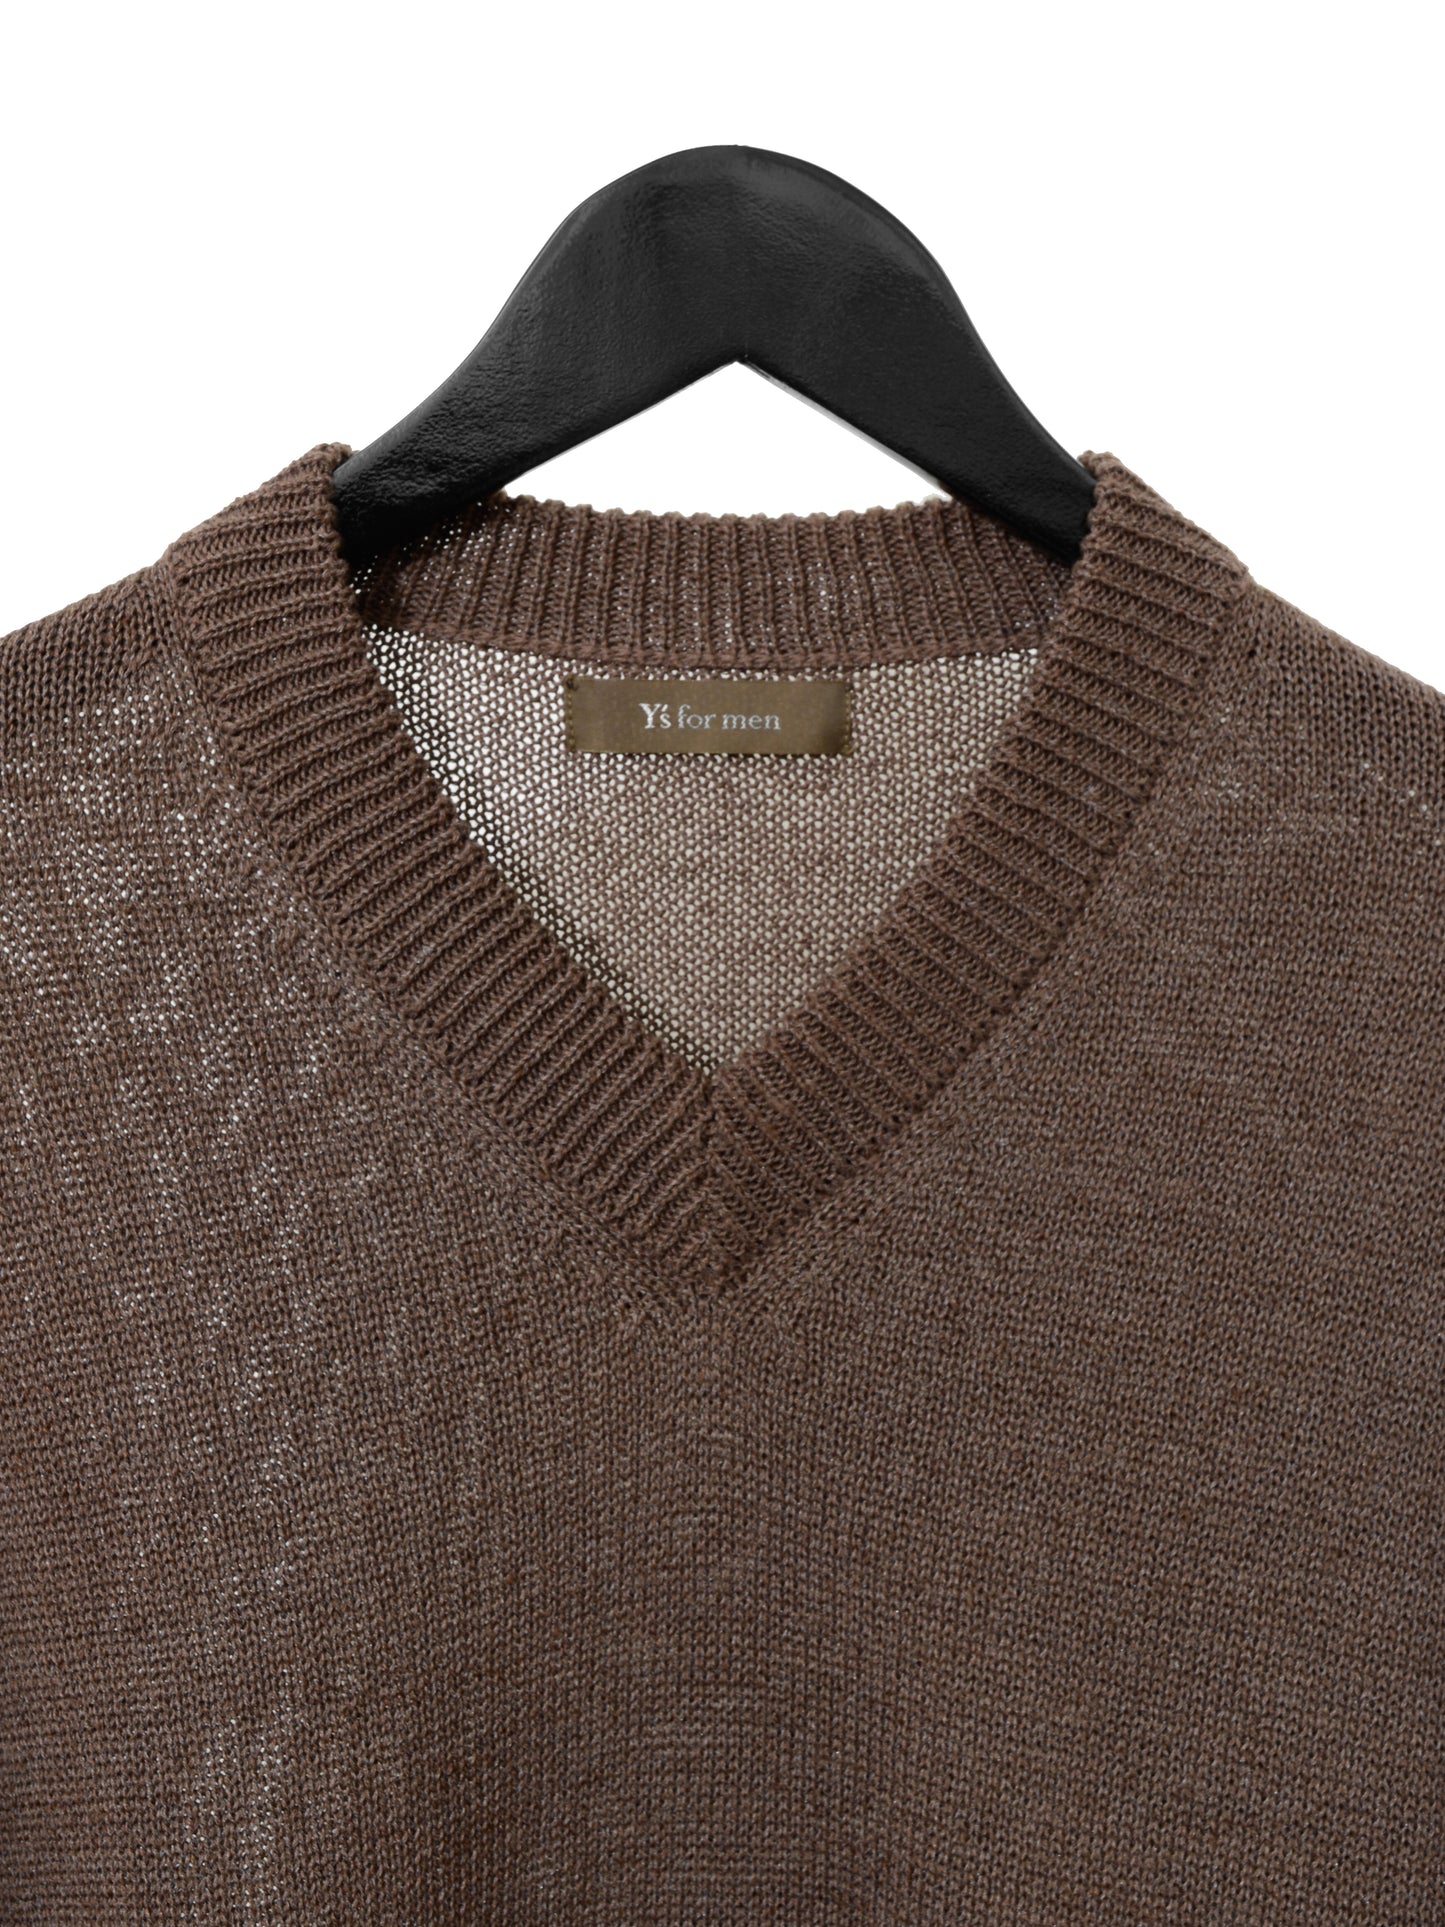 knit pullover acorn ∙ linen poly ∙ one size